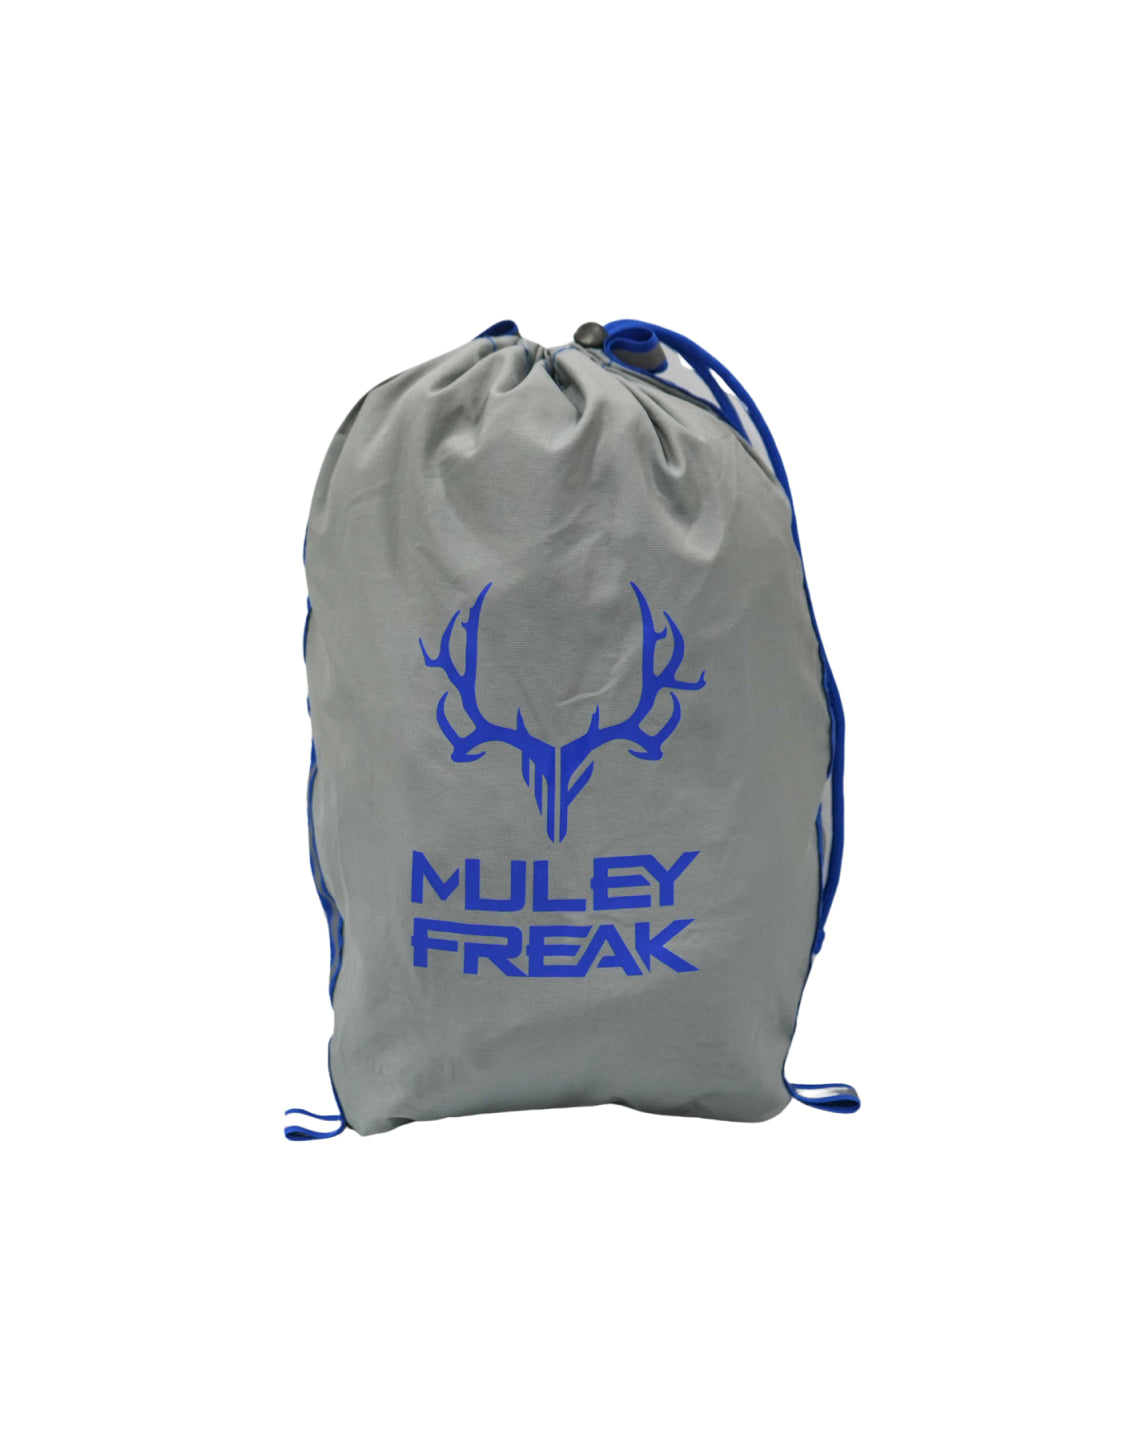 "Muley Freak Head Bag, perfectly sized for mule deer heads or additional meat, with sturdy paracord cinch system.